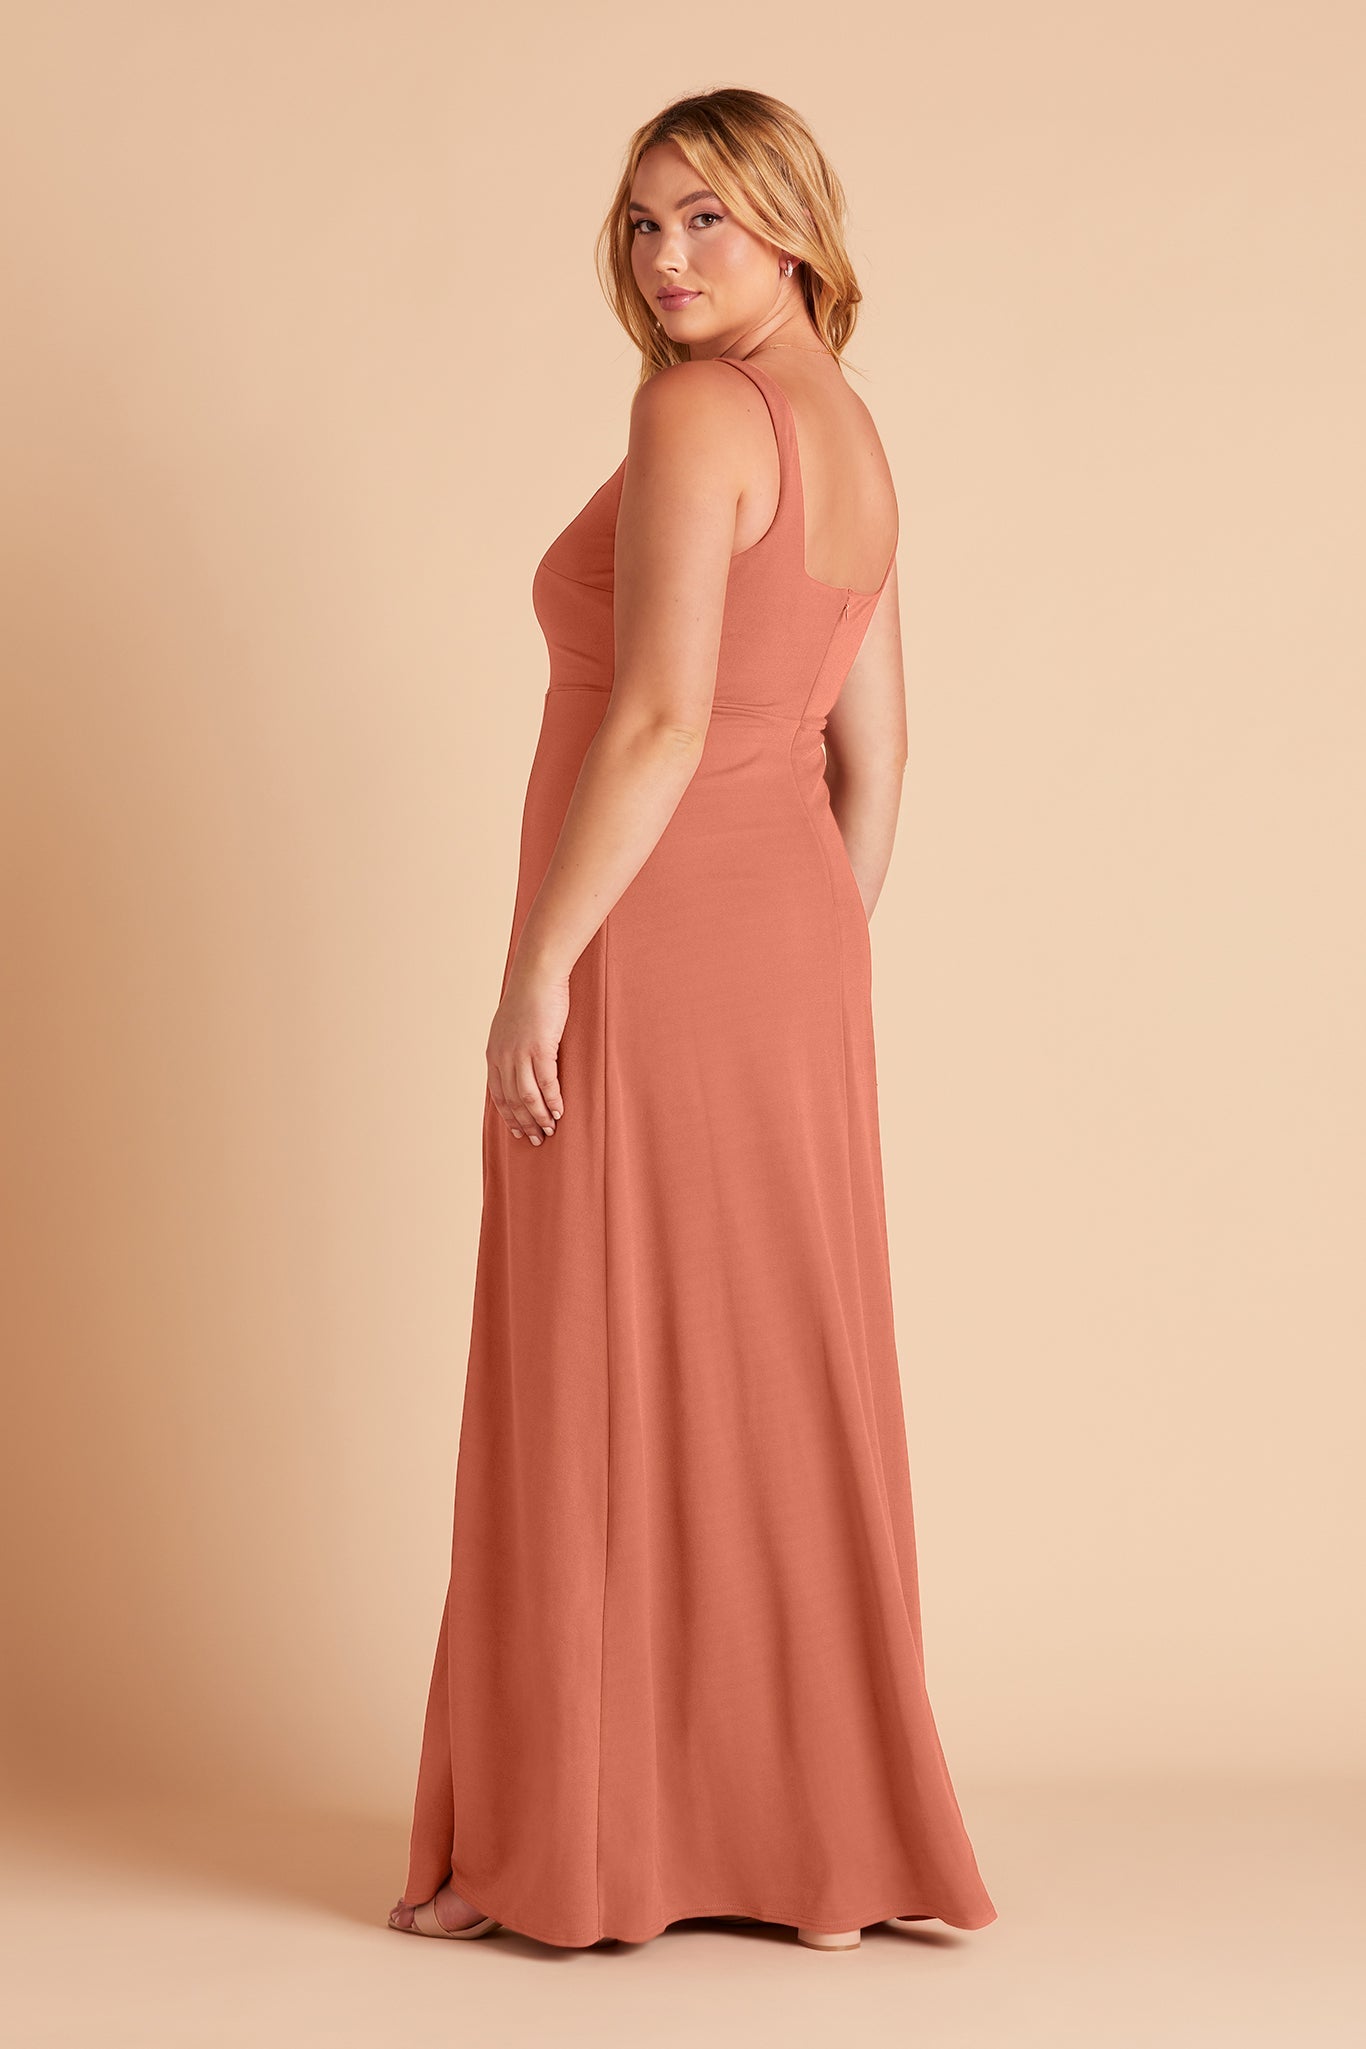 Alex plus size convertible bridesmaid dress with slit in terracotta crepe by Birdy Grey, side view